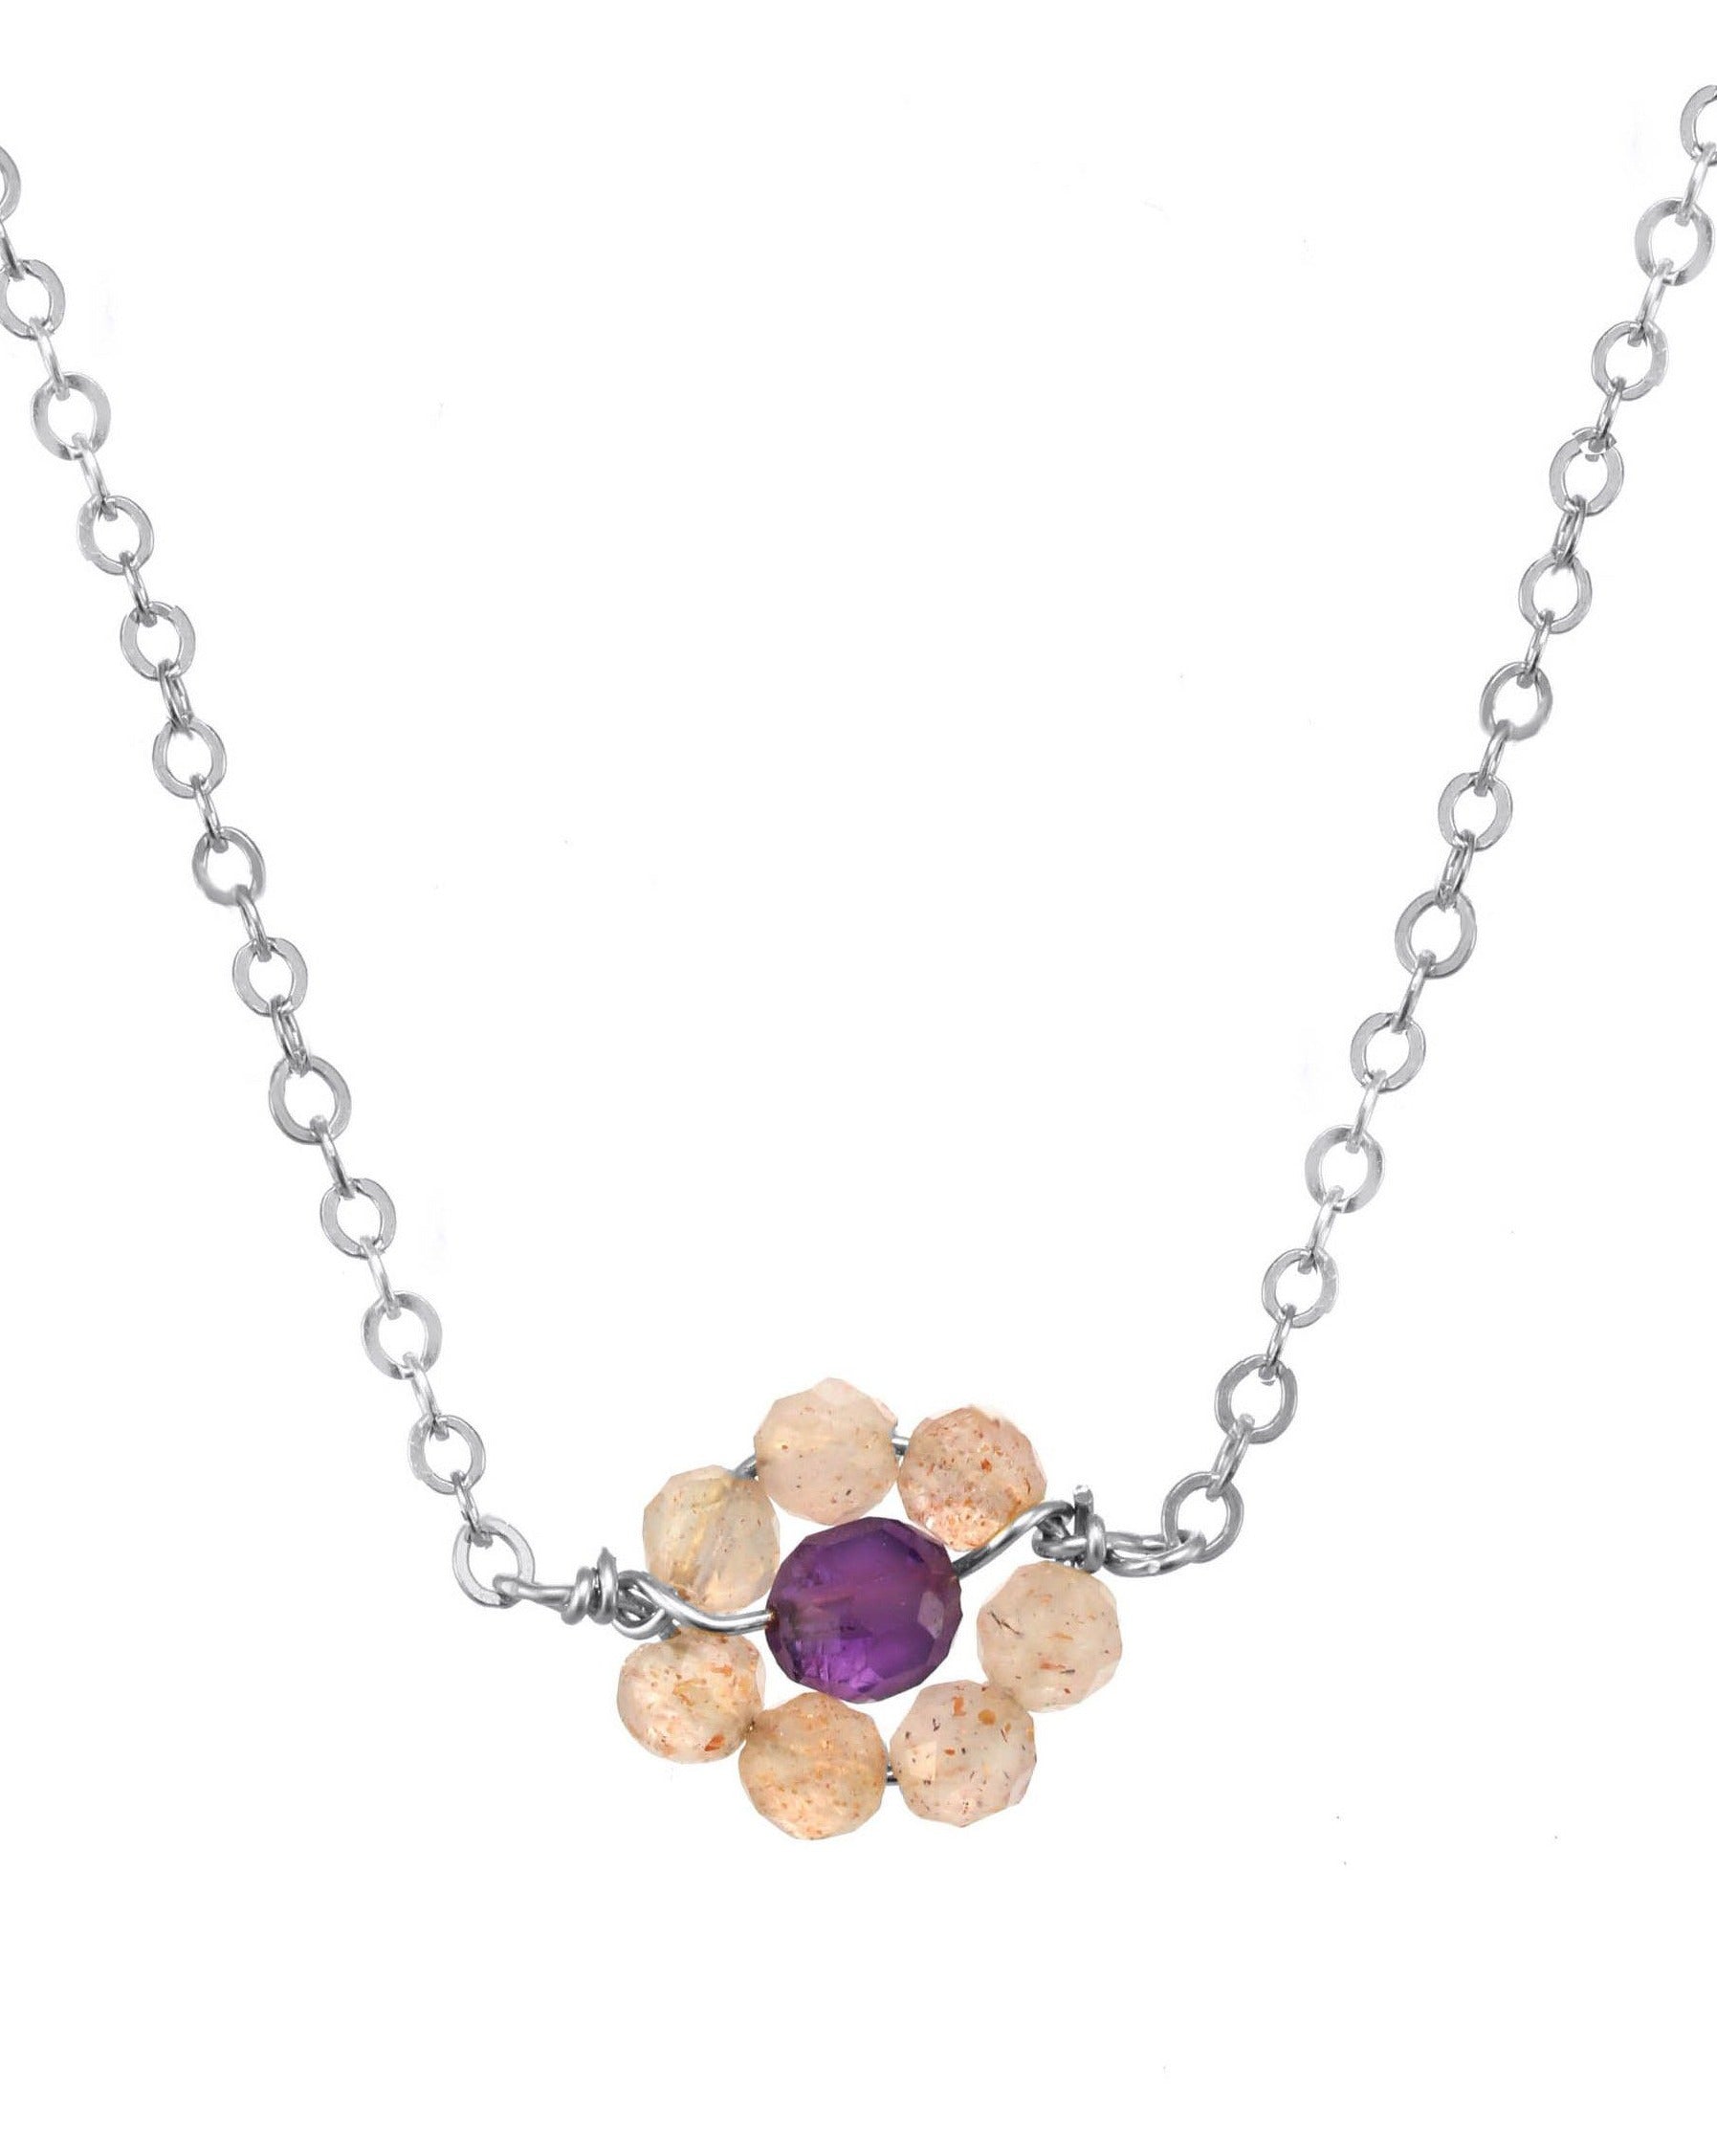 Little Hill Necklace by KOZAKH. A 16 to 18 inch adjustable length necklace, crafted in Sterling Silver, featuring 2mm faceted Imperial Topaz gems and a 3mm  faceted Garnet forming a flower charm.